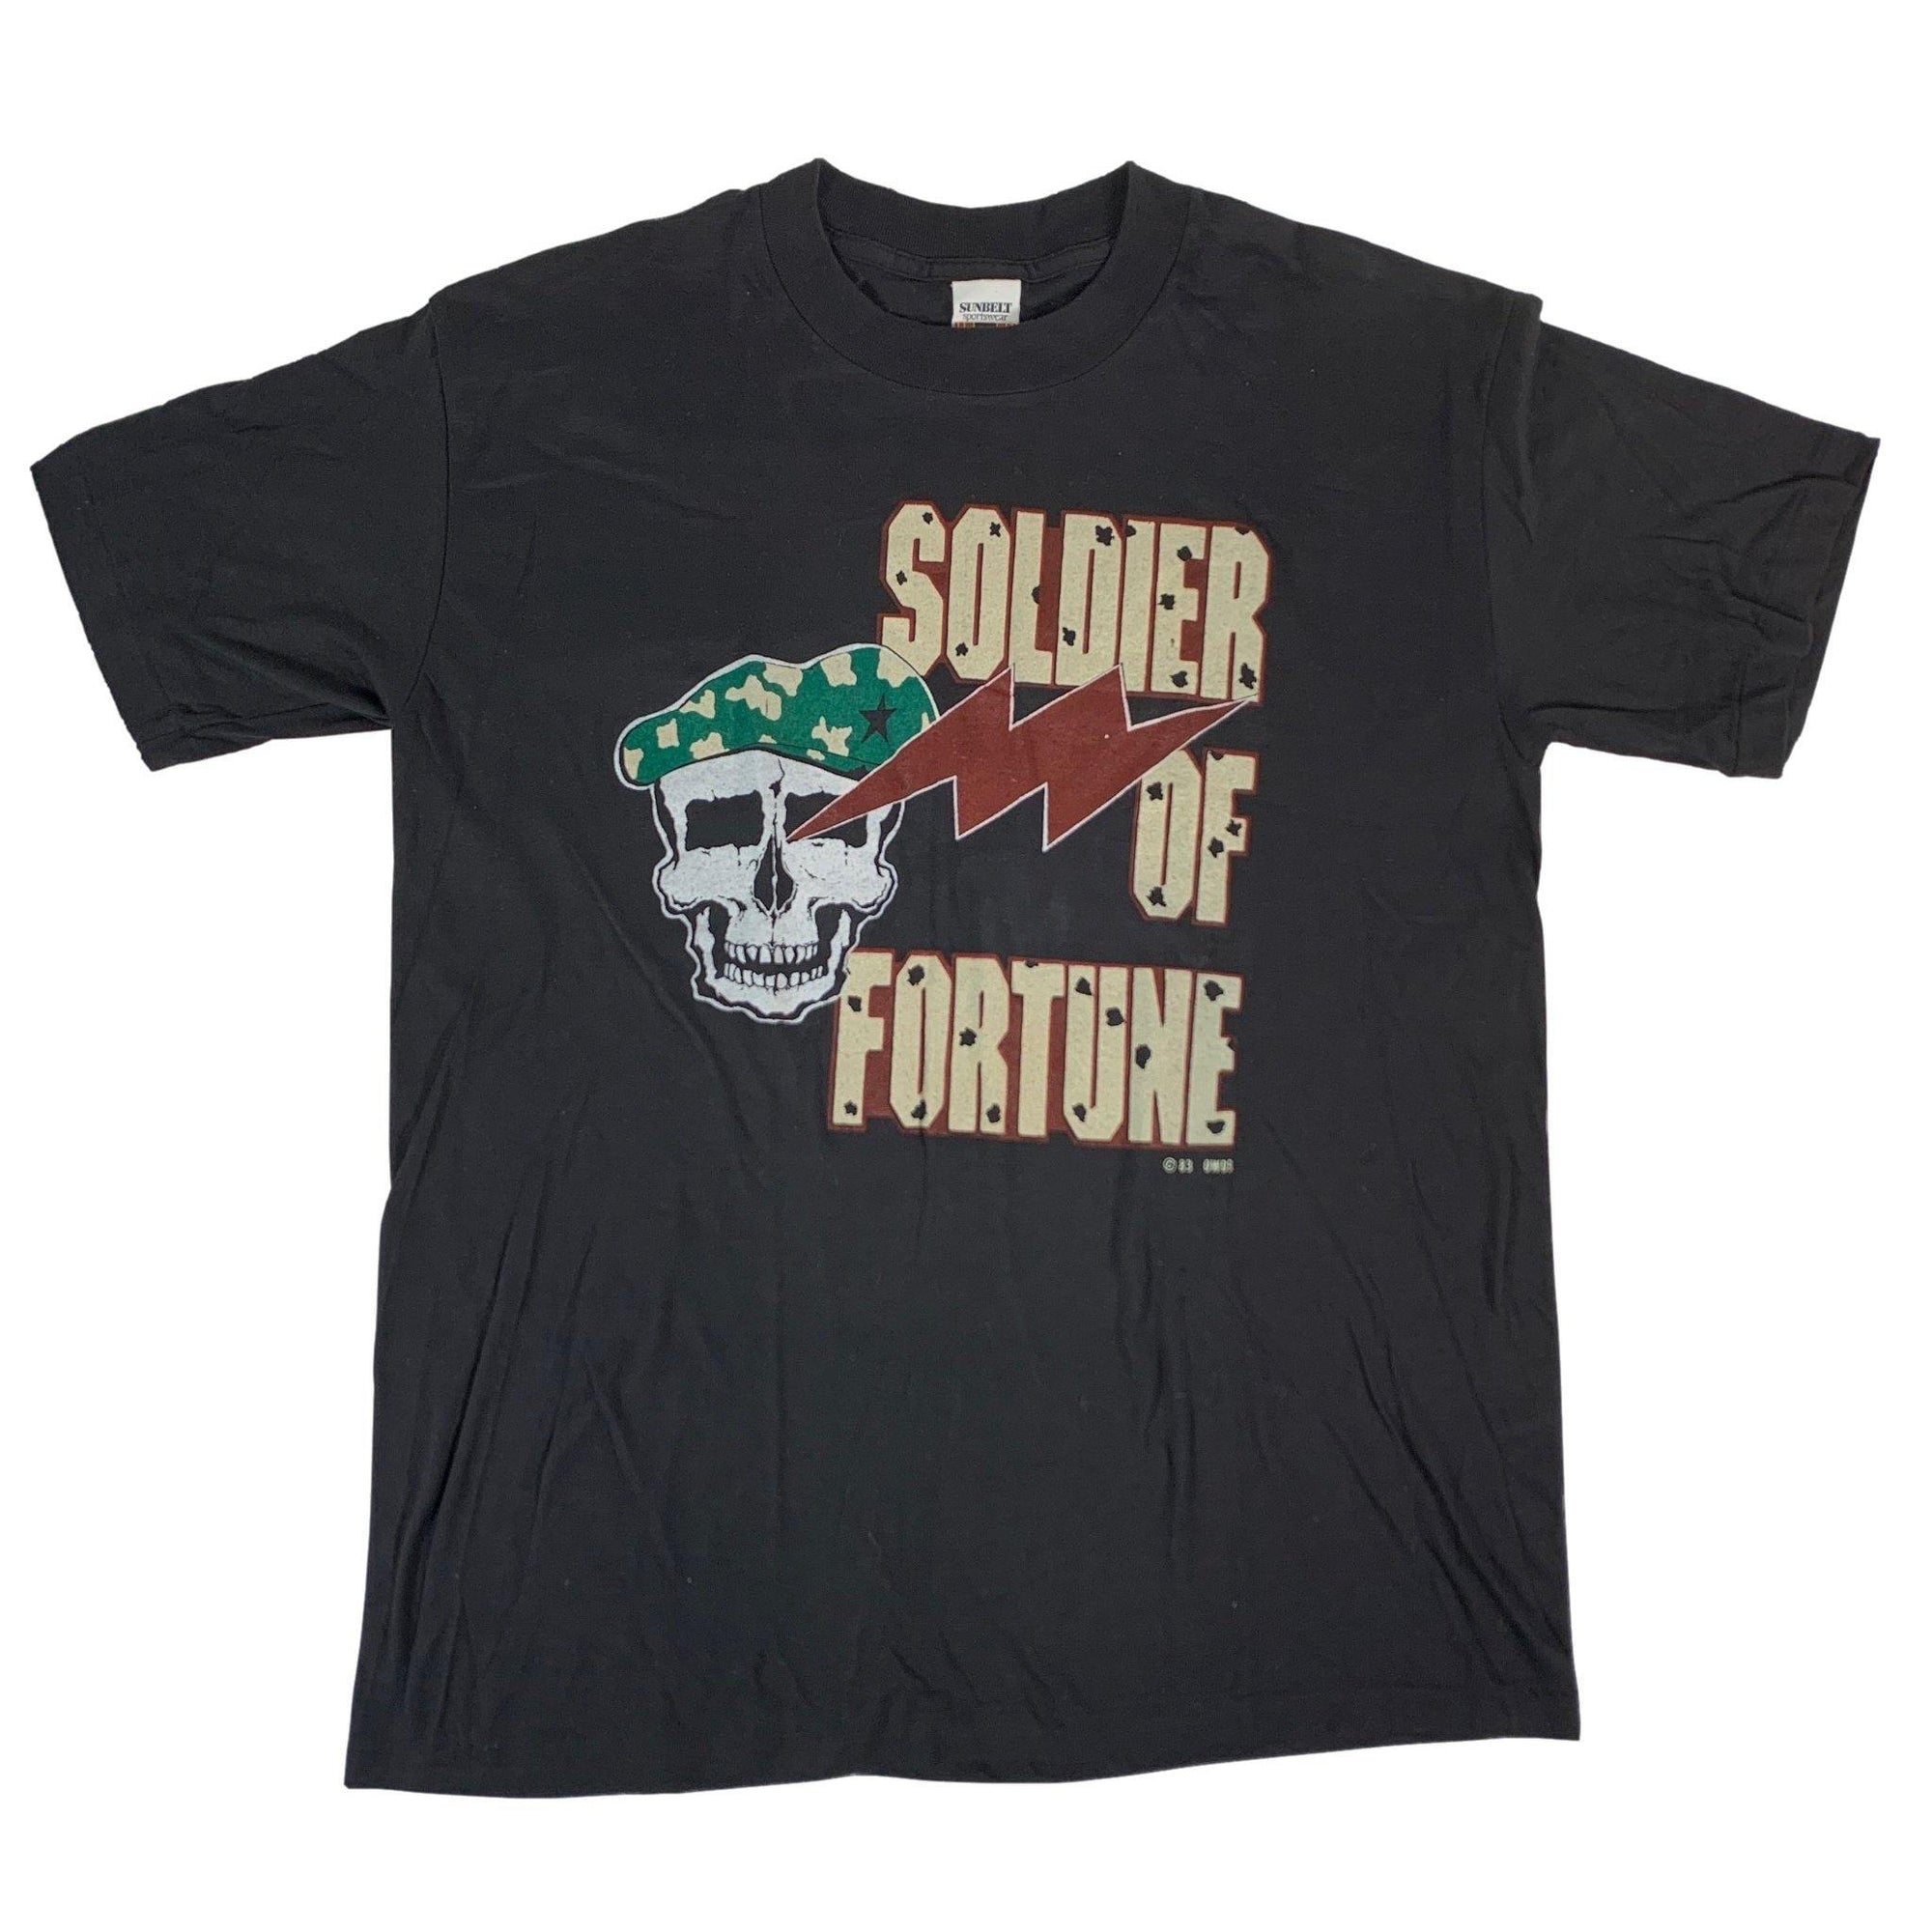 Vintage Soldiers Of Fortune "1983" T-Shirt - jointcustodydc